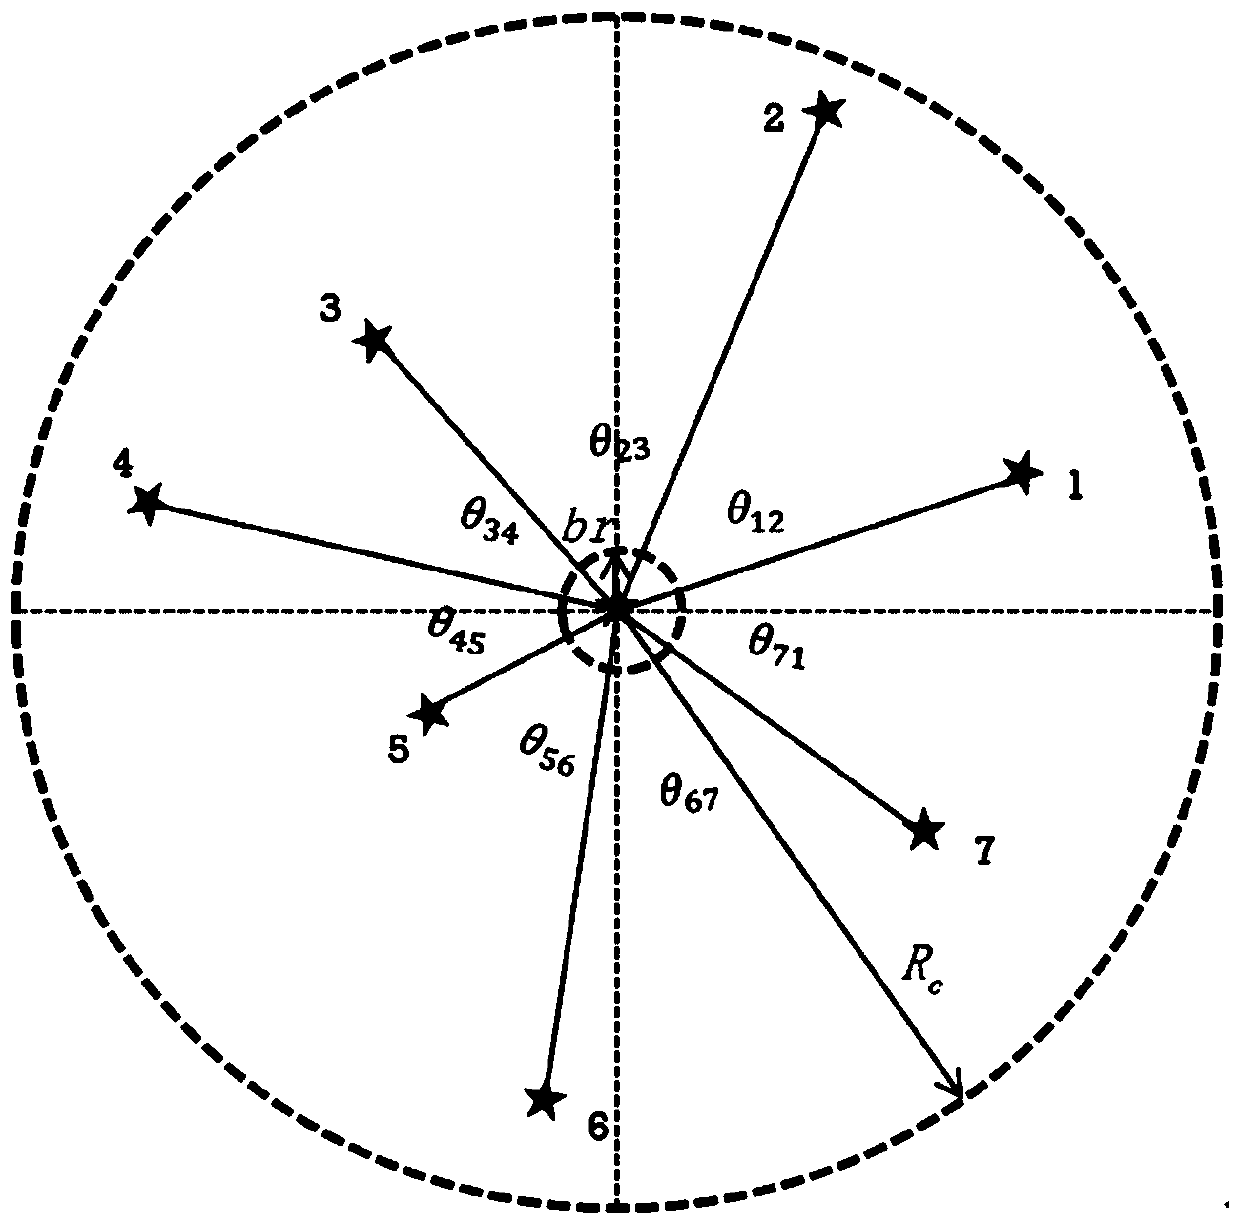 Star map identification method based on radial and dynamic circumferential modes